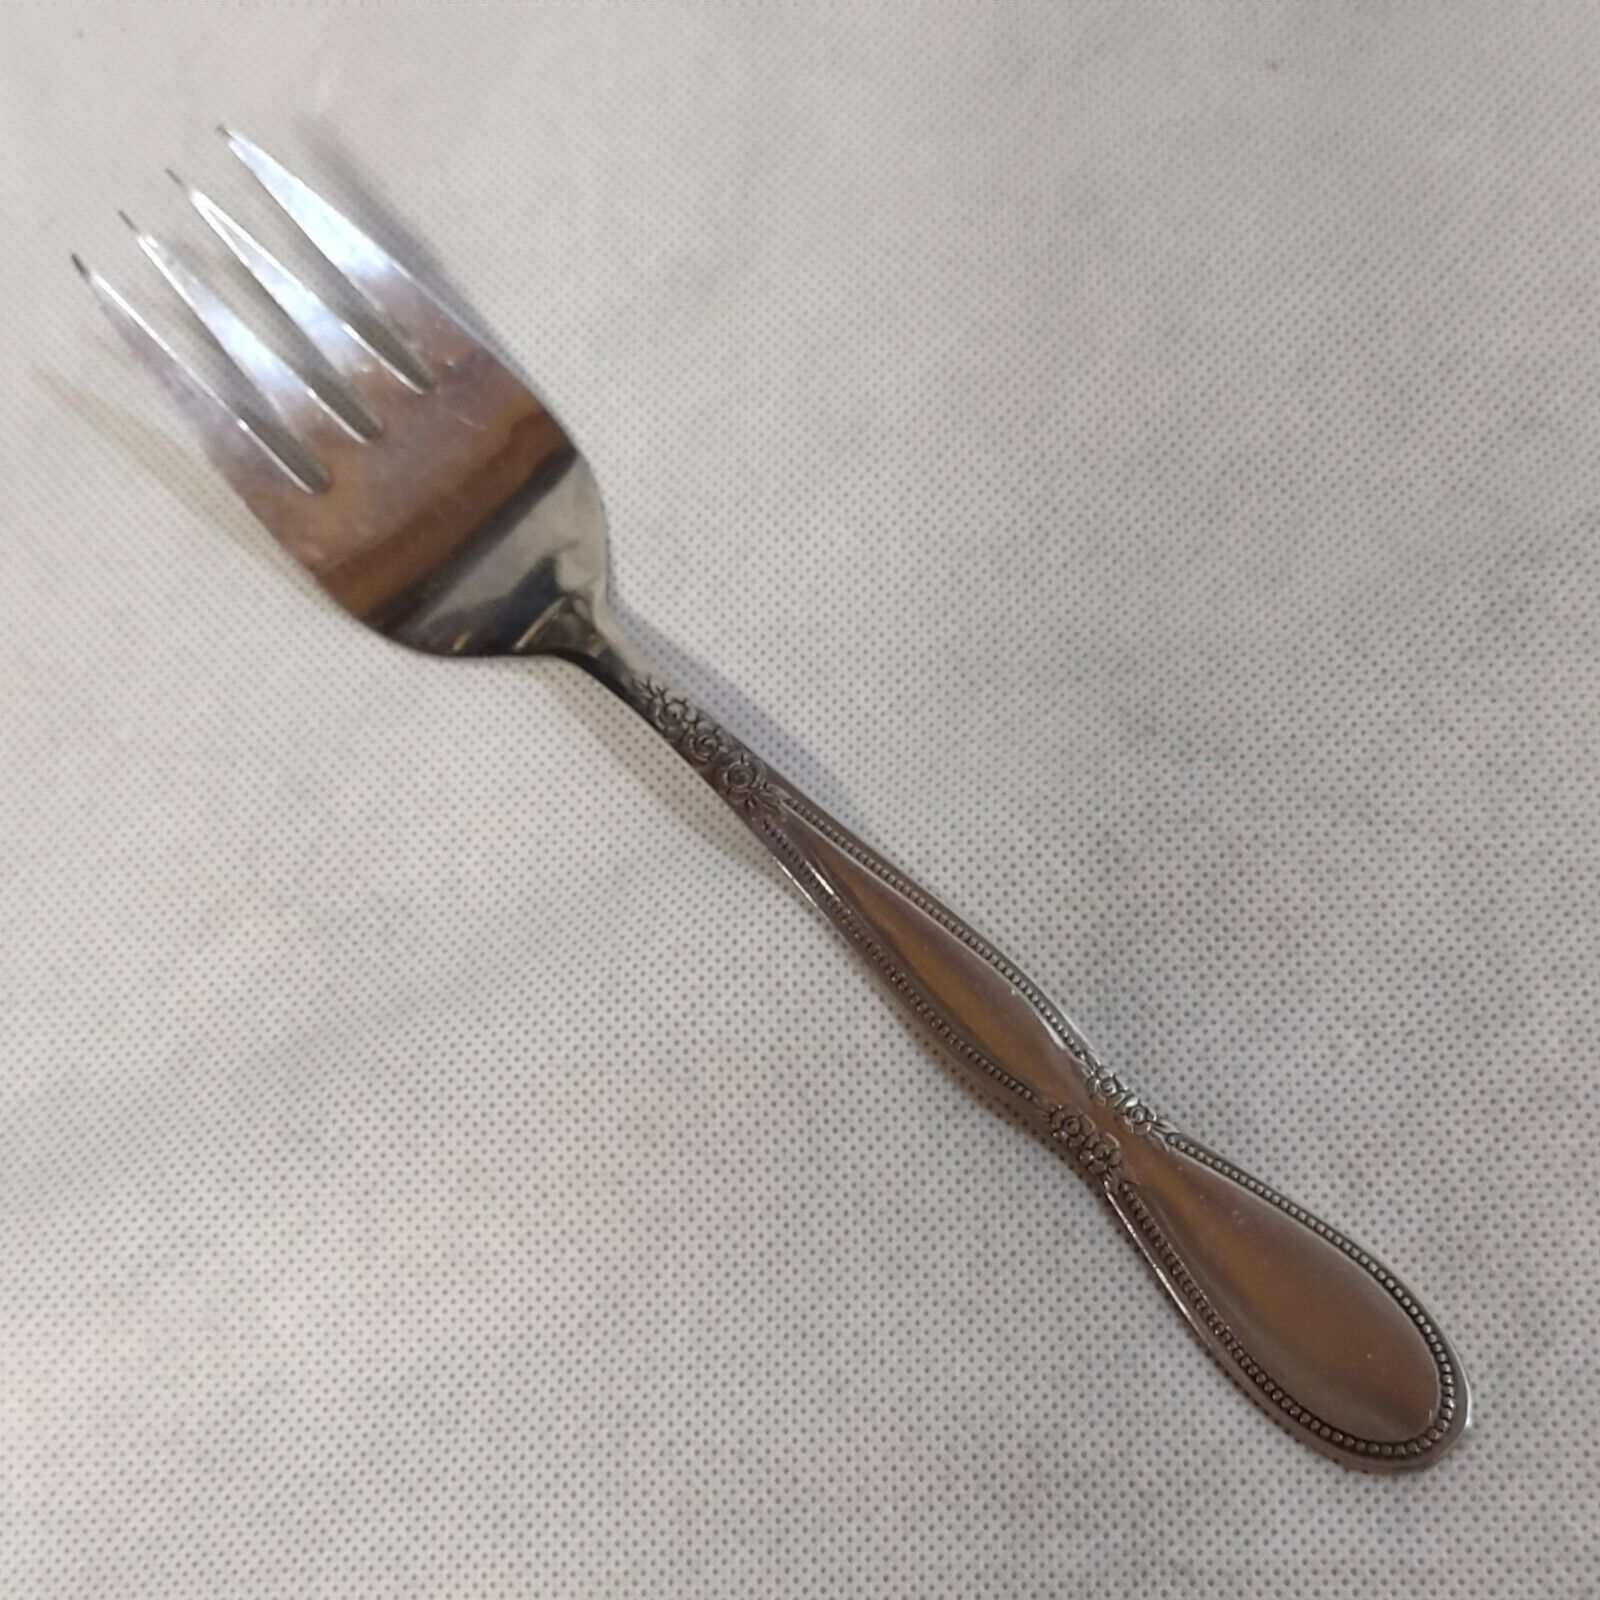 Oneida Northland Colonial Boutique Cold Meat Serving Fork Stainless Steel - $9.95